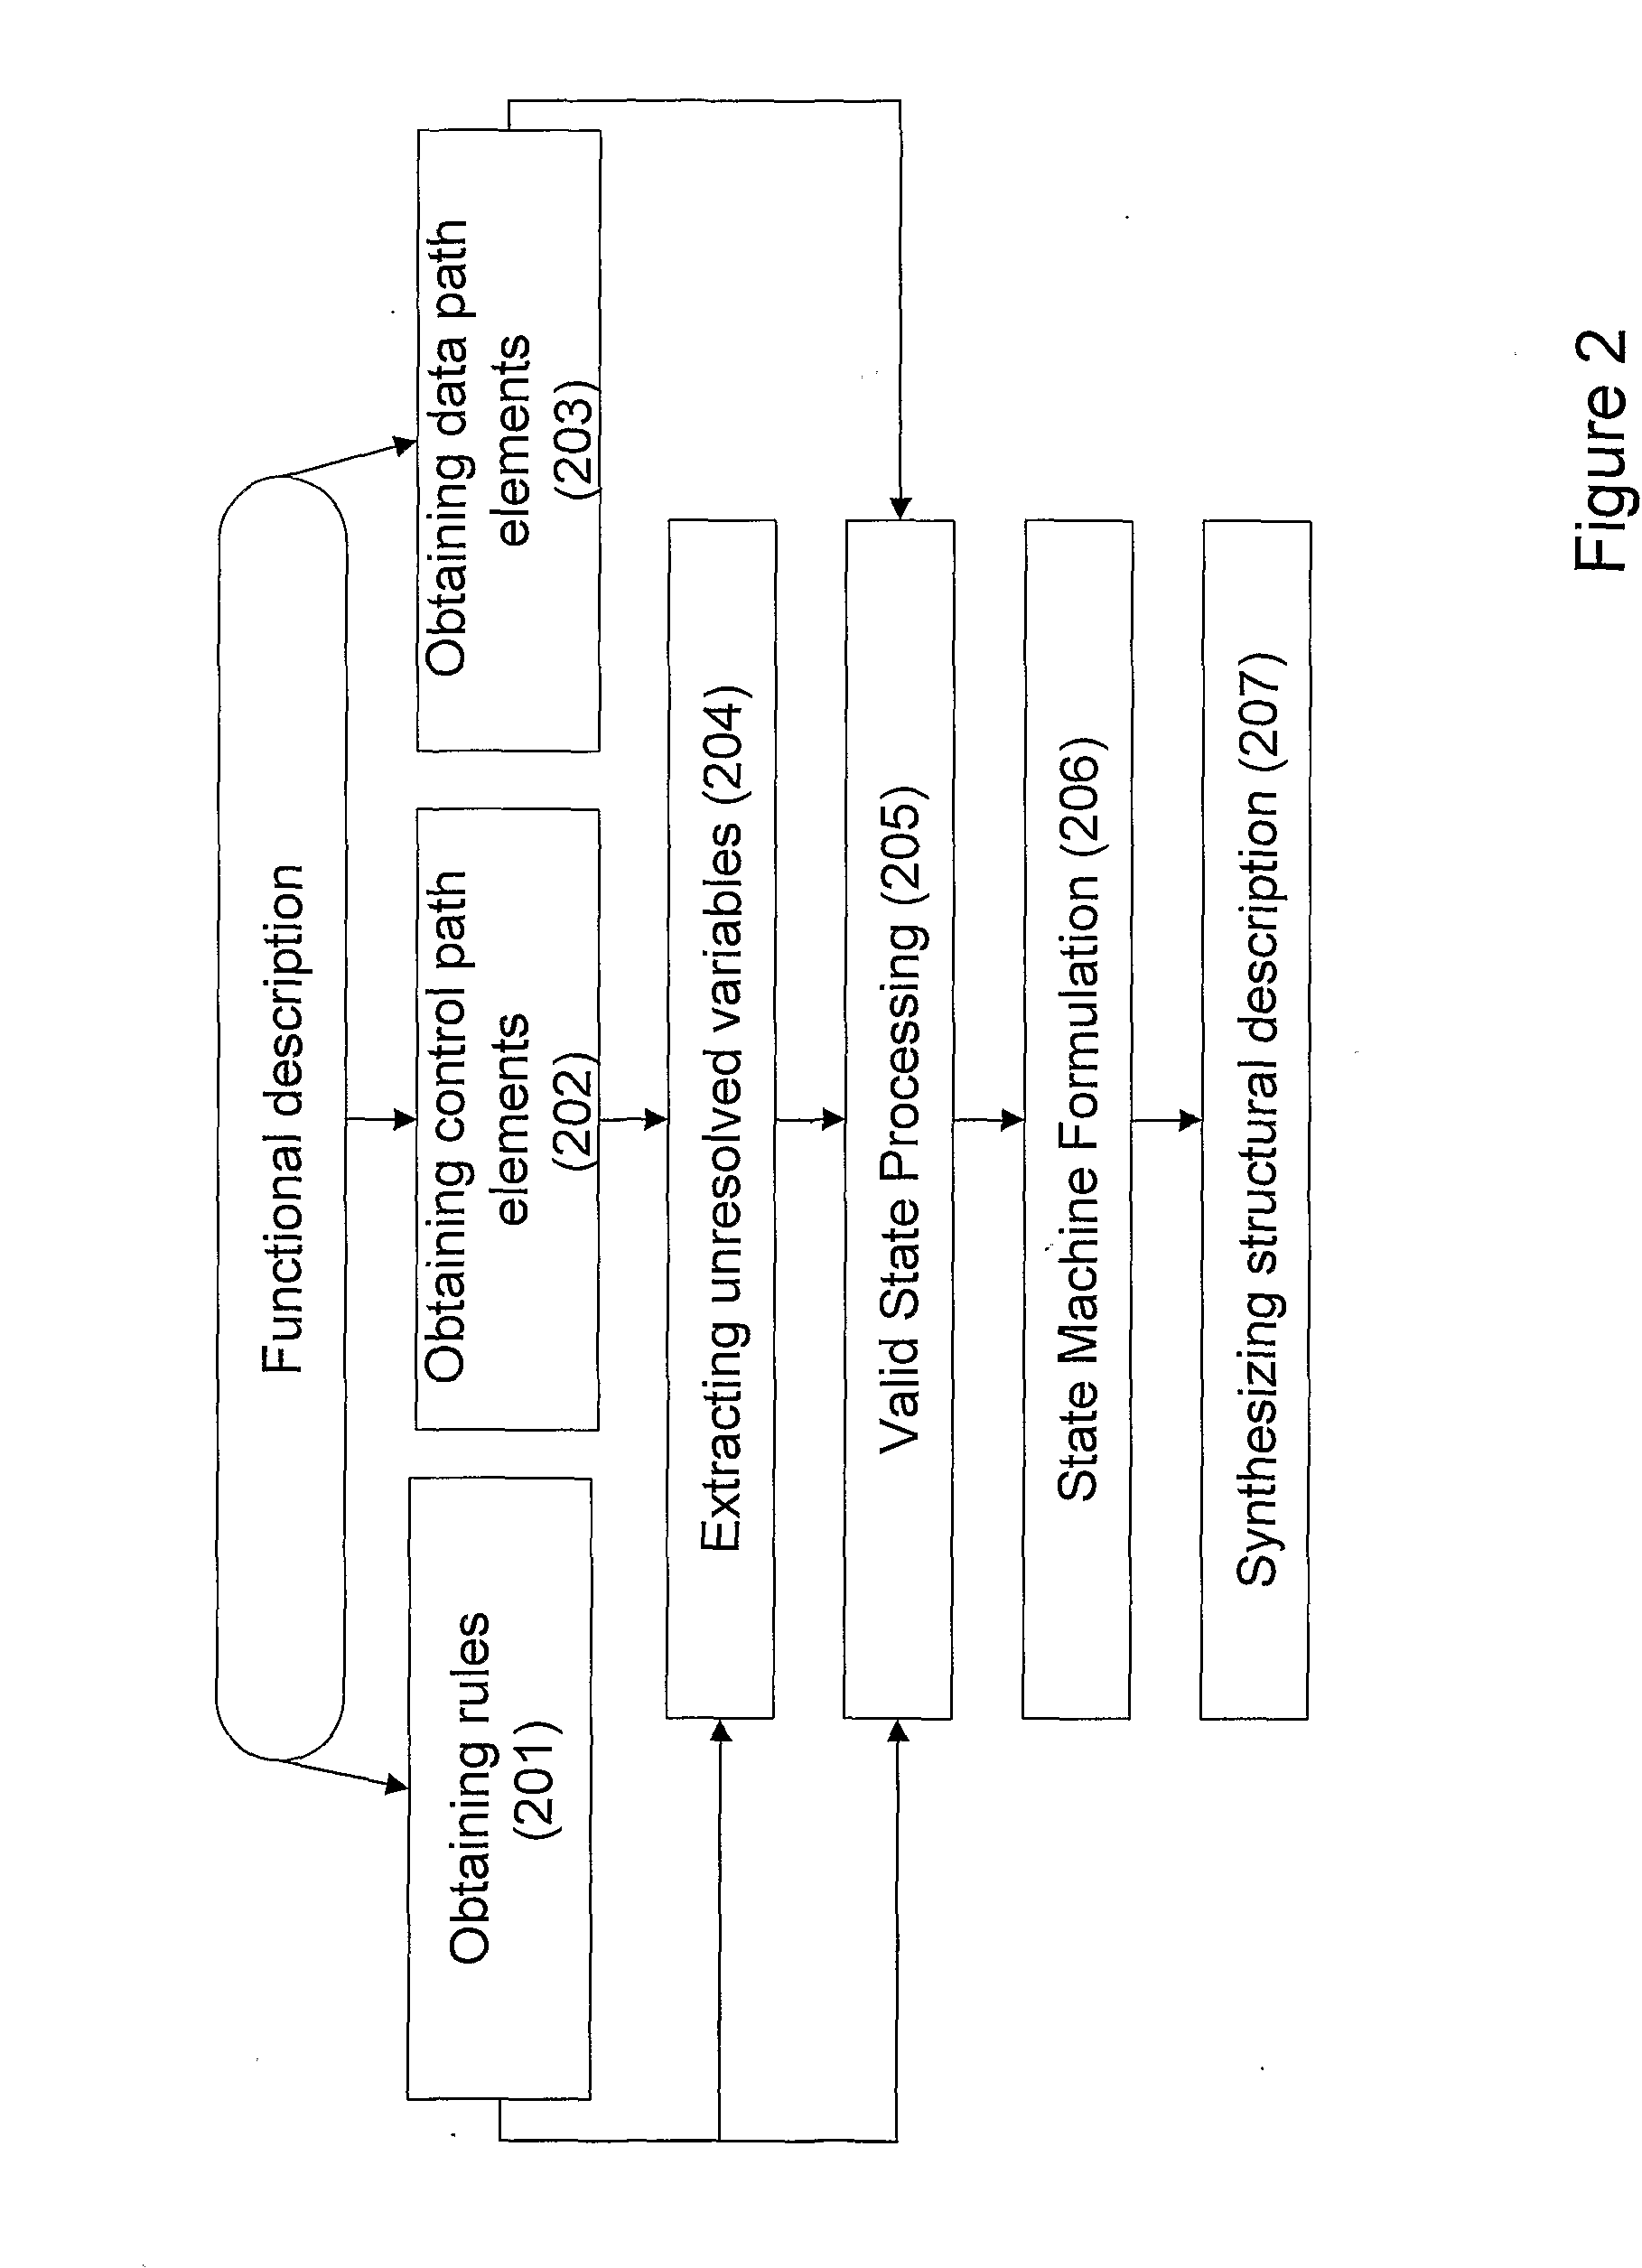 Method And System For Designing A Structural Level Description Of An Electronic Circuit